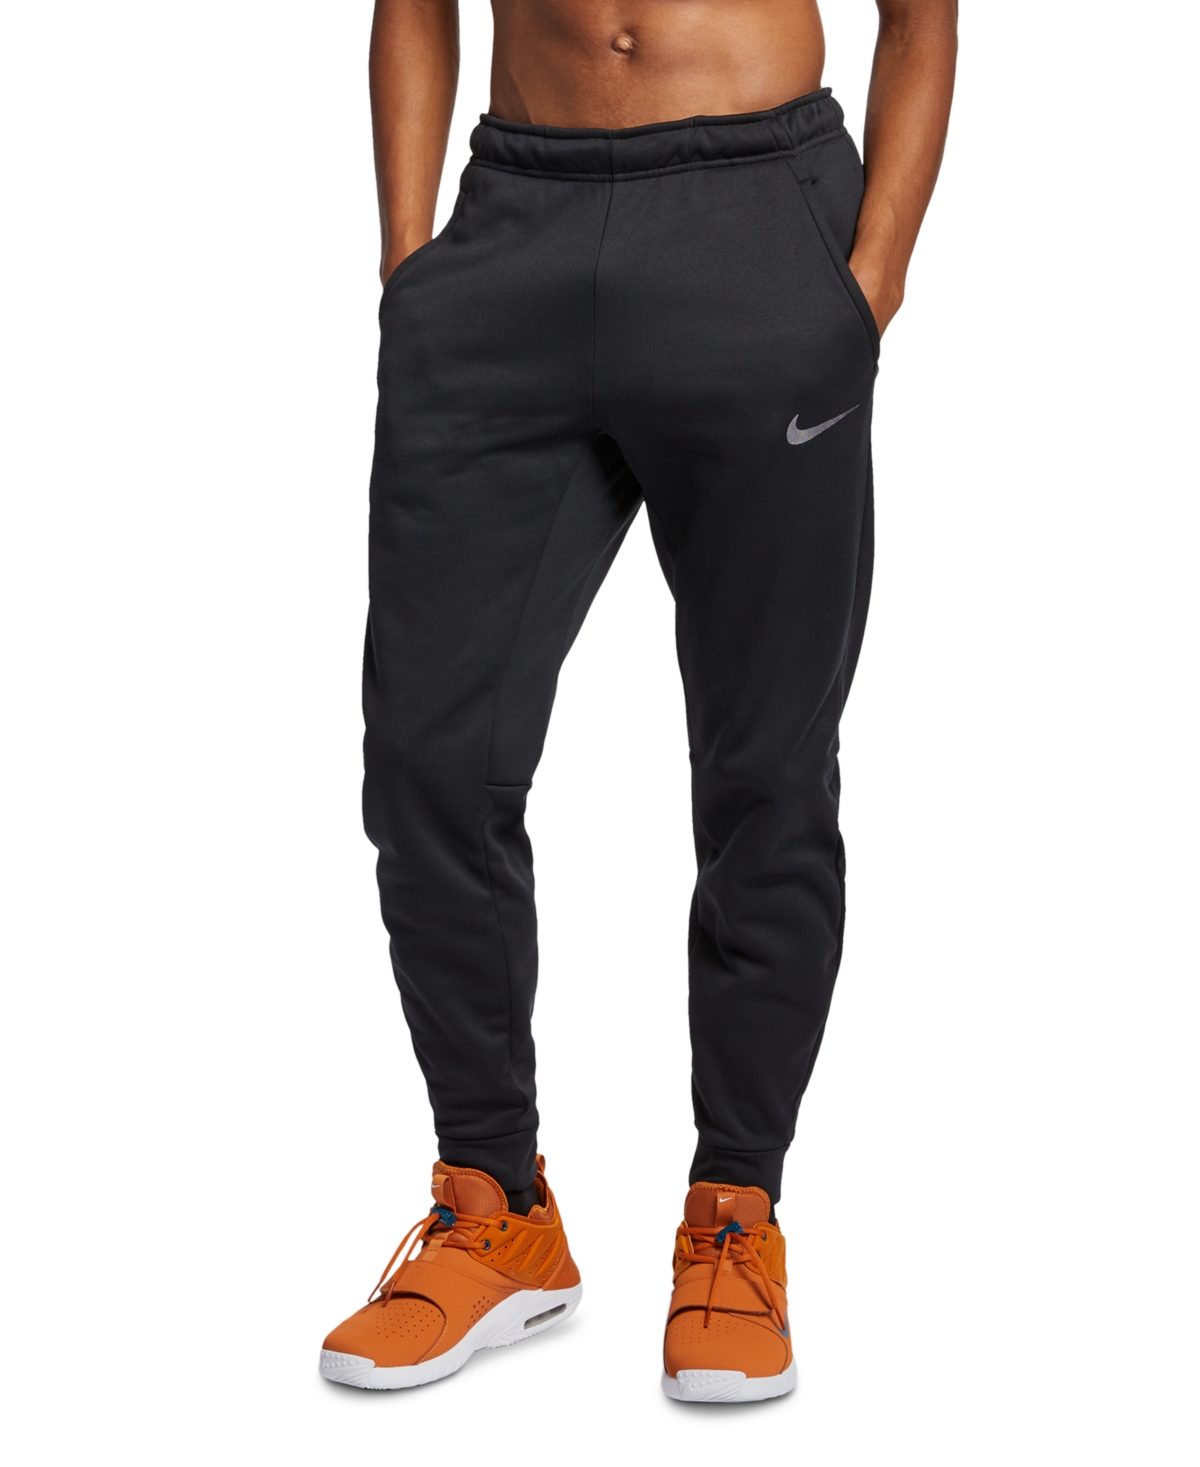 UPC 886668336176 product image for Nike Men's Therma Tapered Training Pants | upcitemdb.com